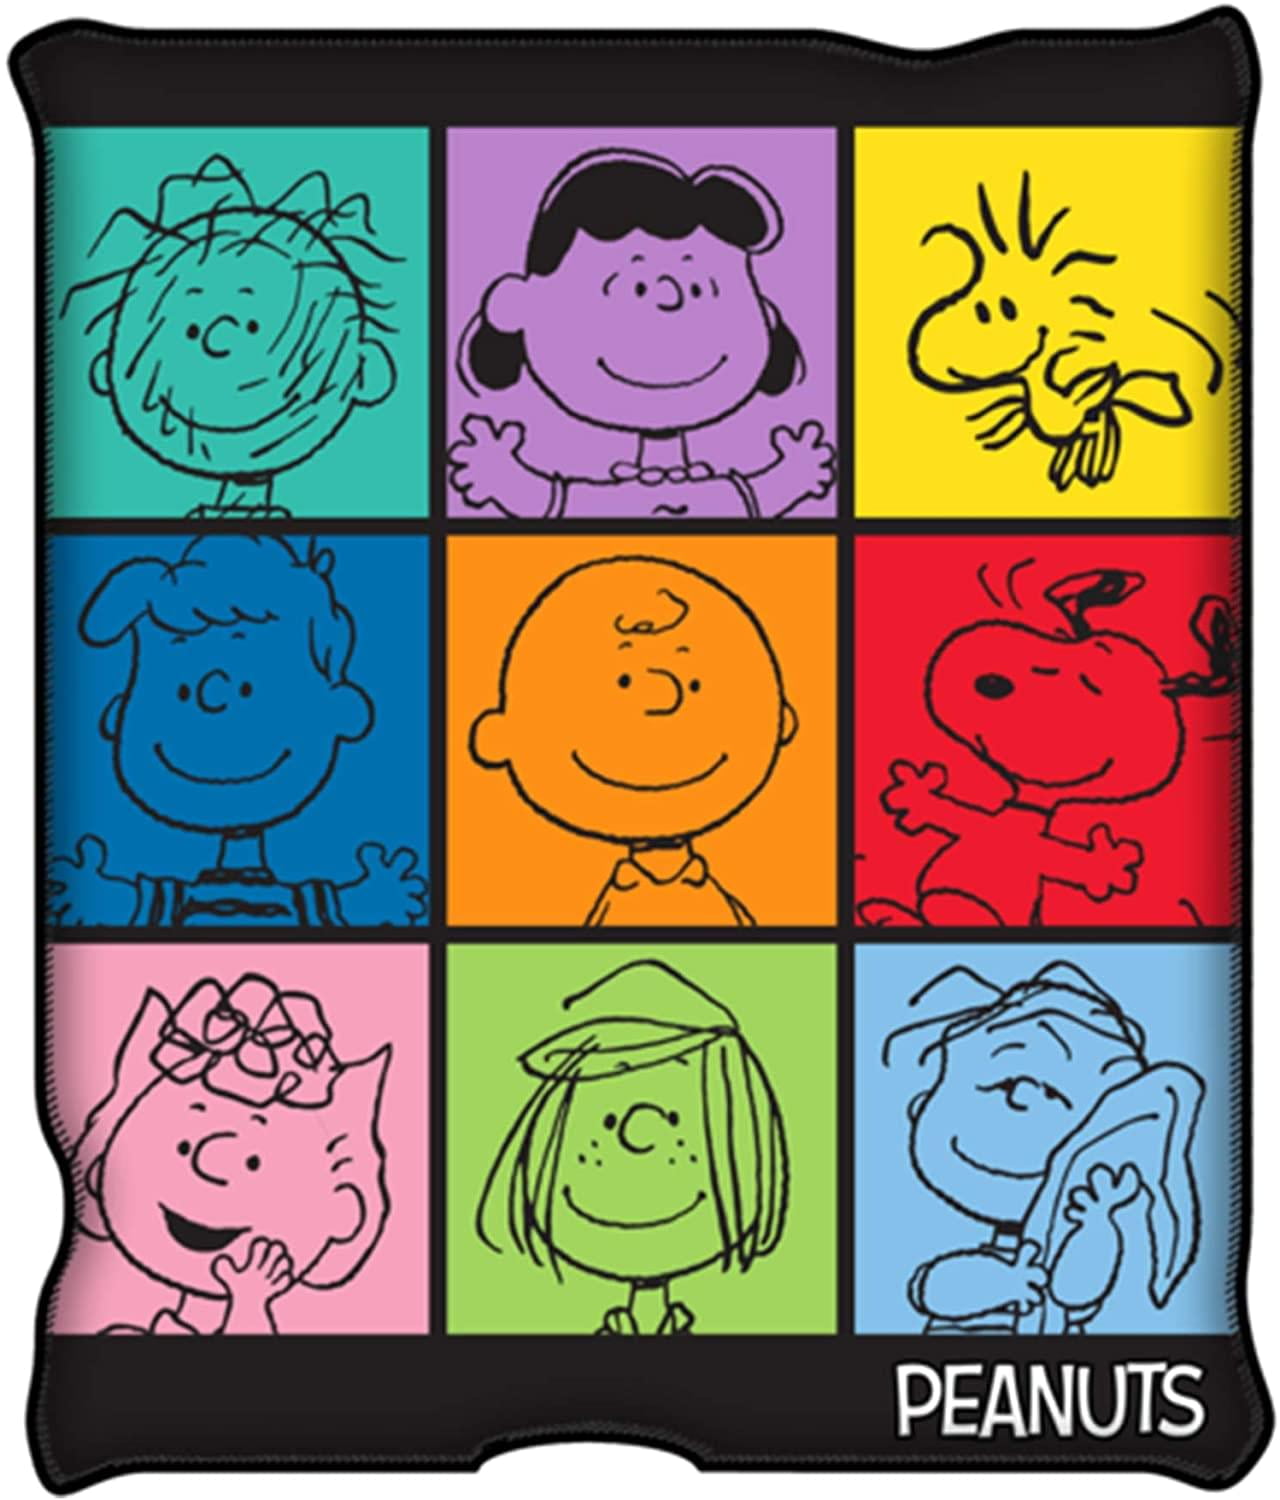 Details about   Charlie Brown Christmas 70th Anniversary Fleece Blanket 